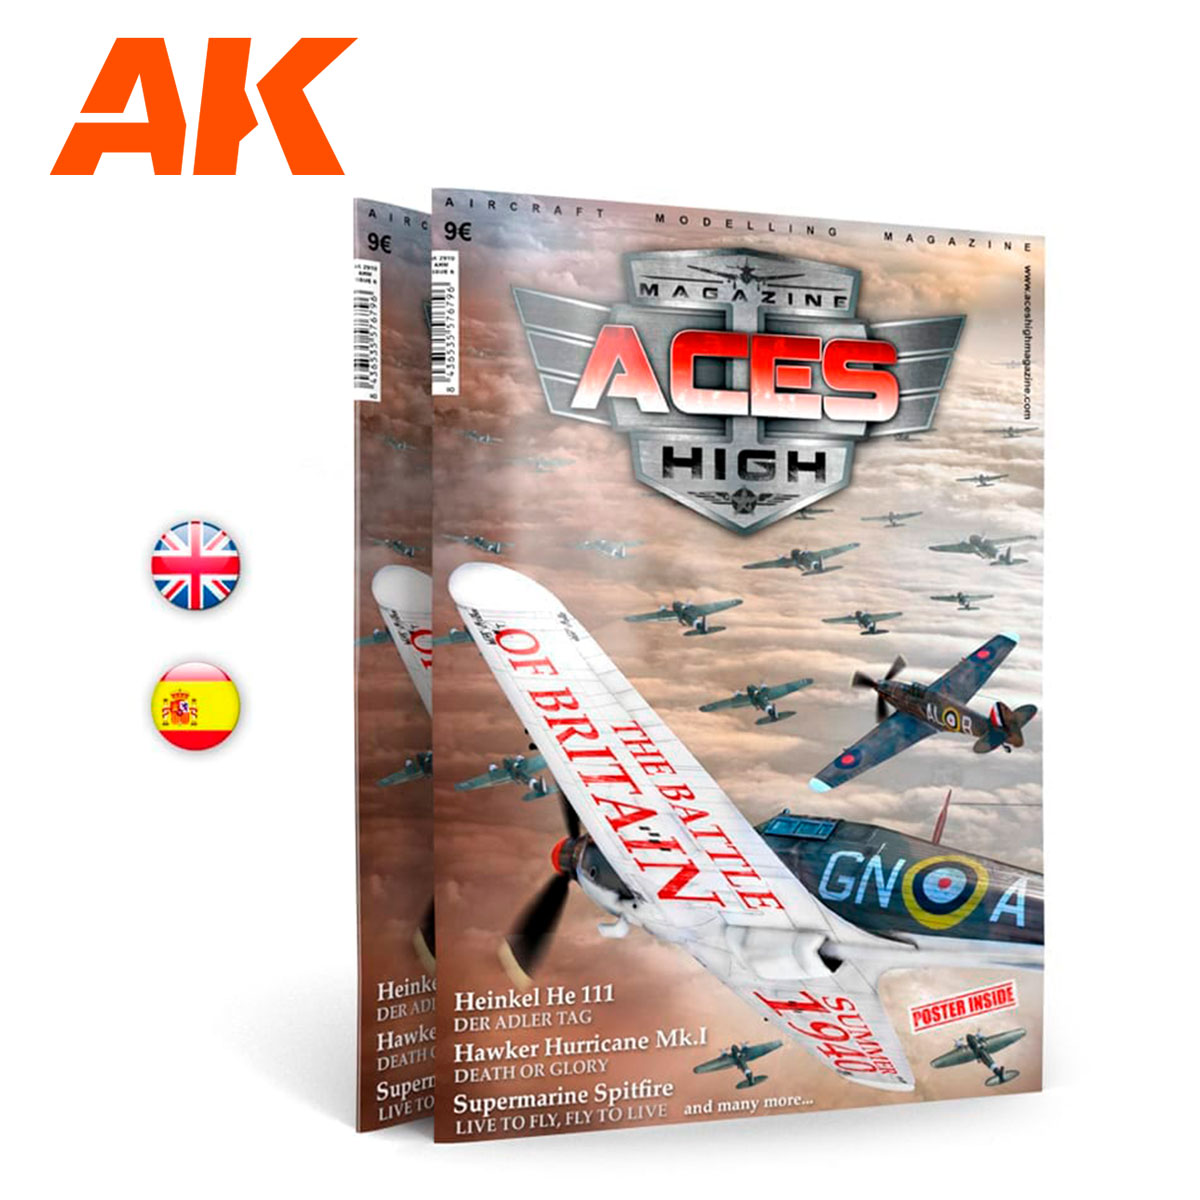 ACES HIGH 06: THE BATTLE OF BRITAIN